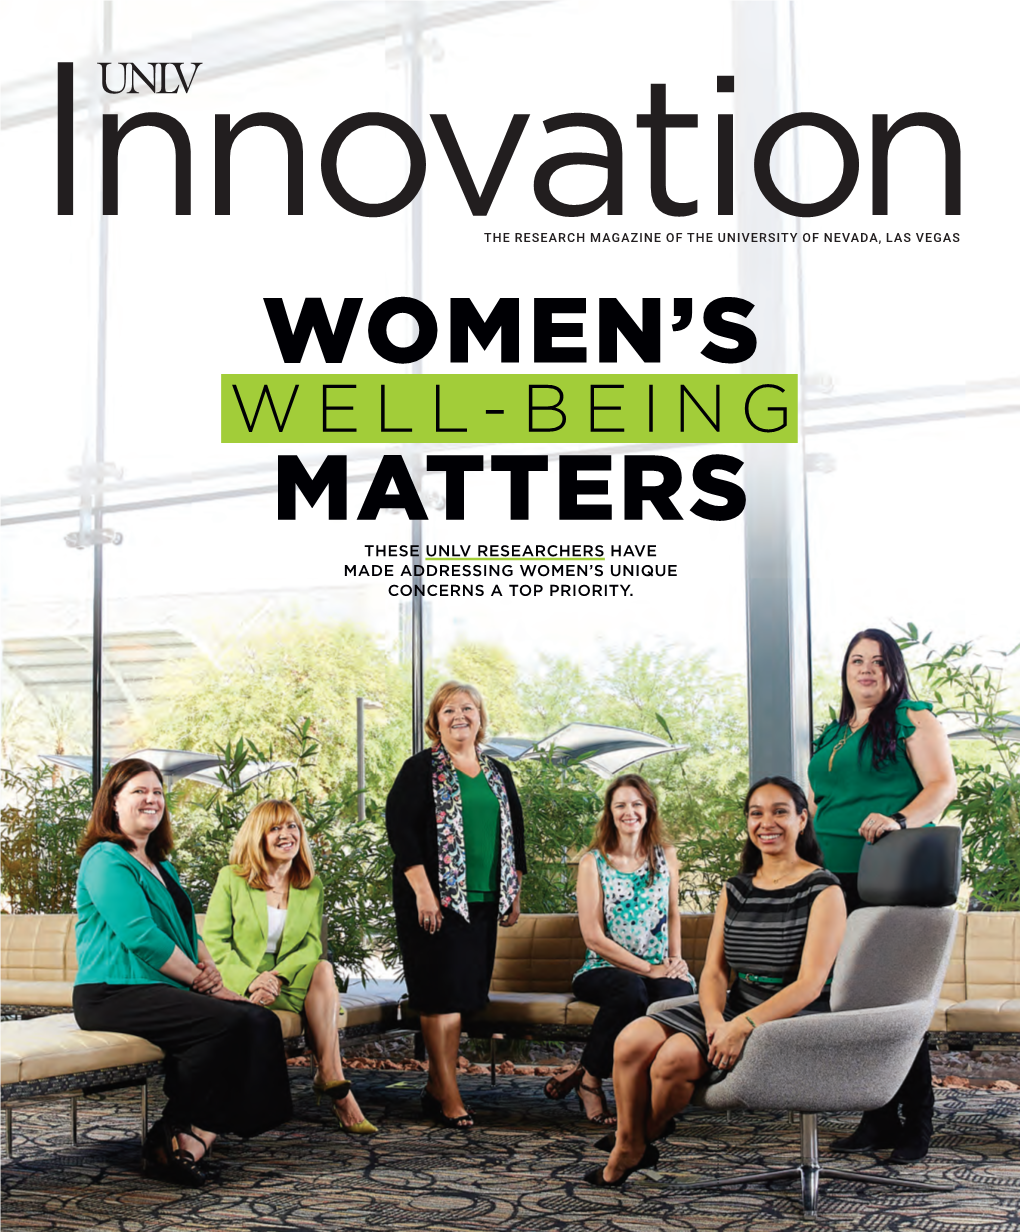 UNLV Innovation: the Research Magazine of the University Of